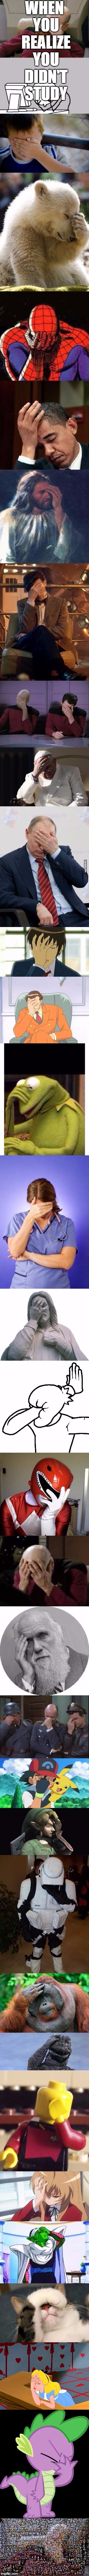 The Epic Facepalm | WHEN YOU REALIZE YOU DIDN'T STUDY | image tagged in the epic facepalm,scumbag | made w/ Imgflip meme maker